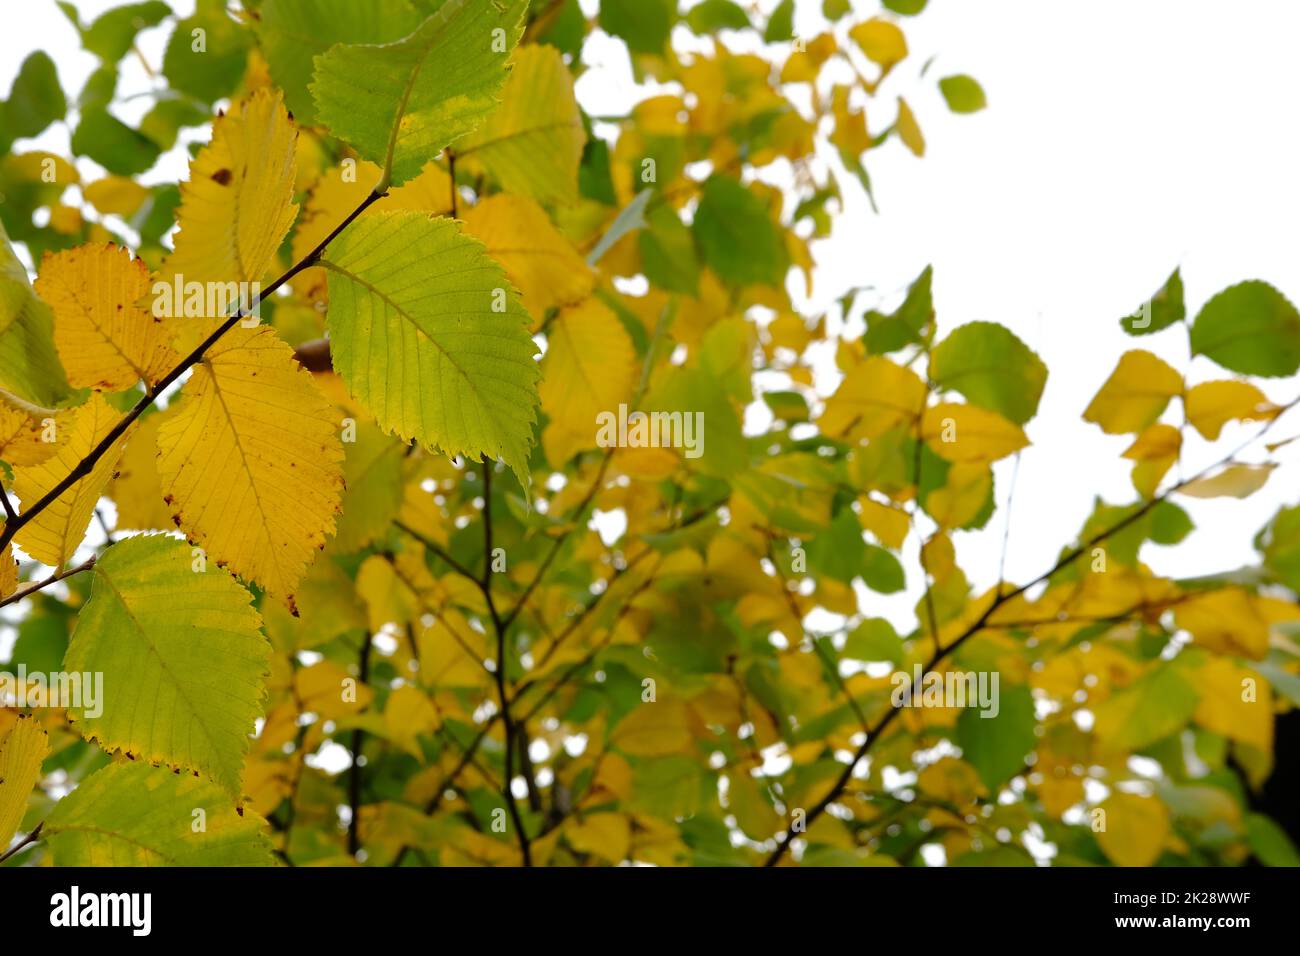 Autumn leaves on the sun. Fall blurred background. Yellow and green leaves Stock Photo